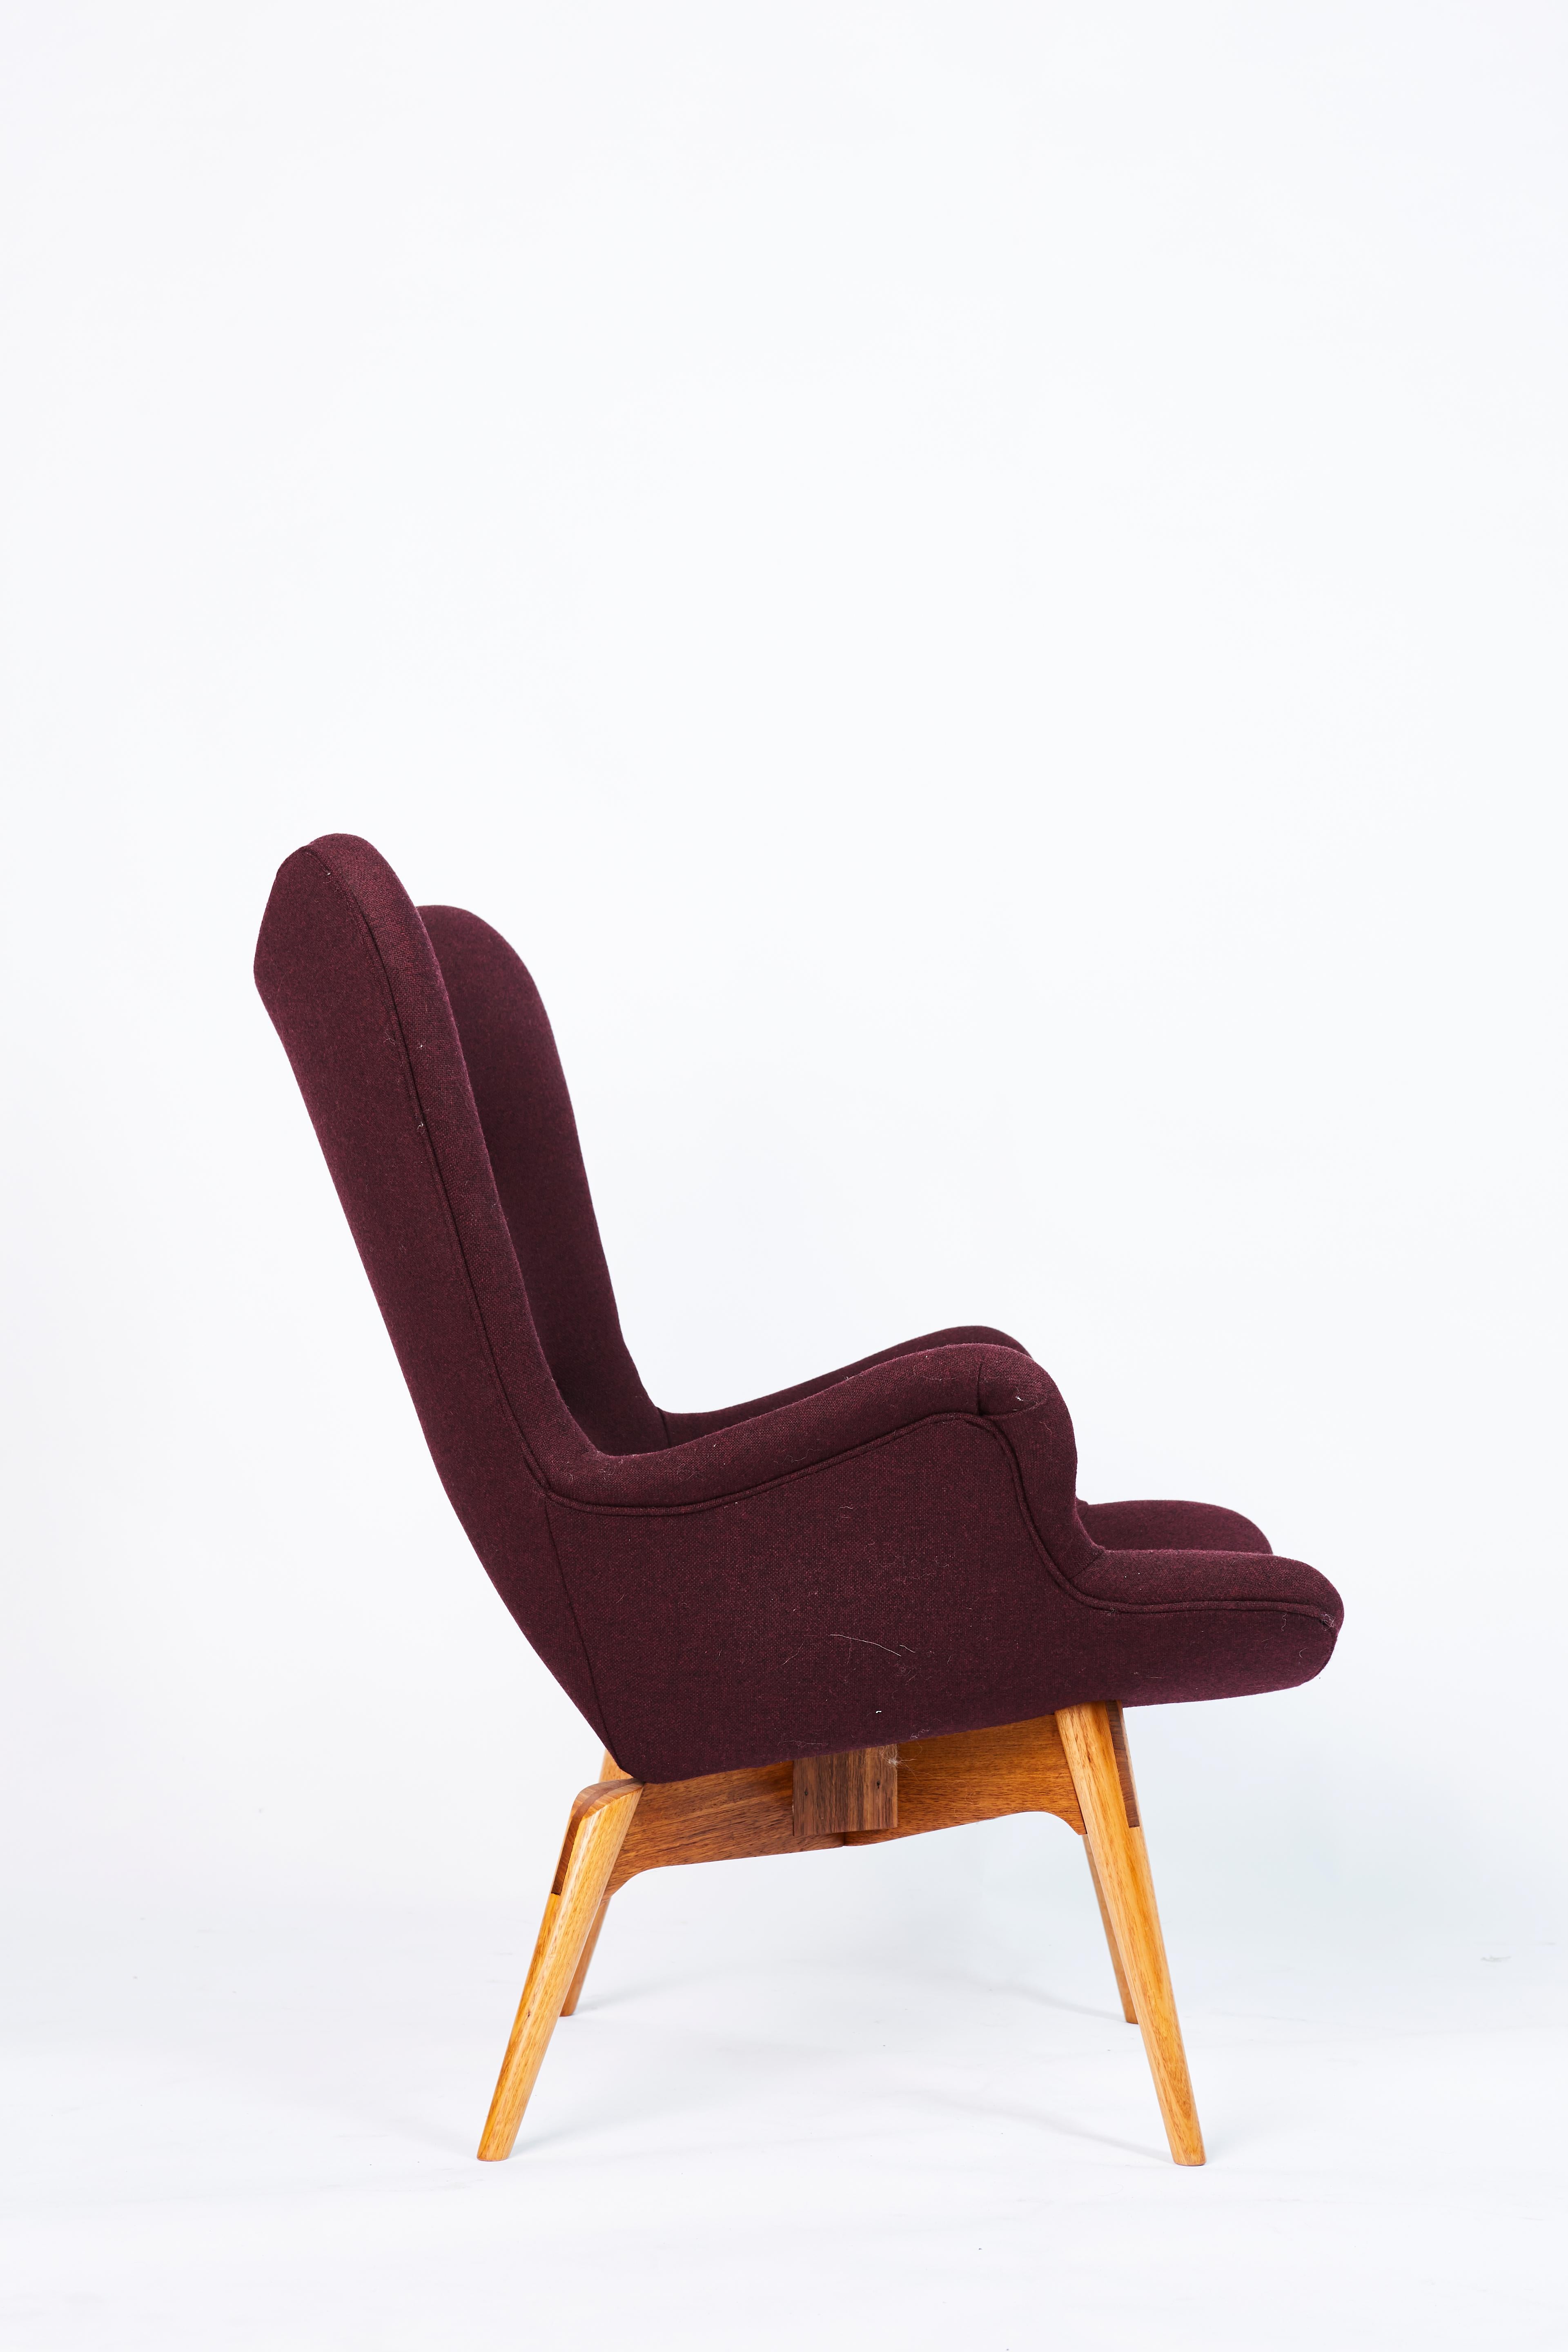 Australian Mid-Century R160 Contour Chair by Grant Featherston